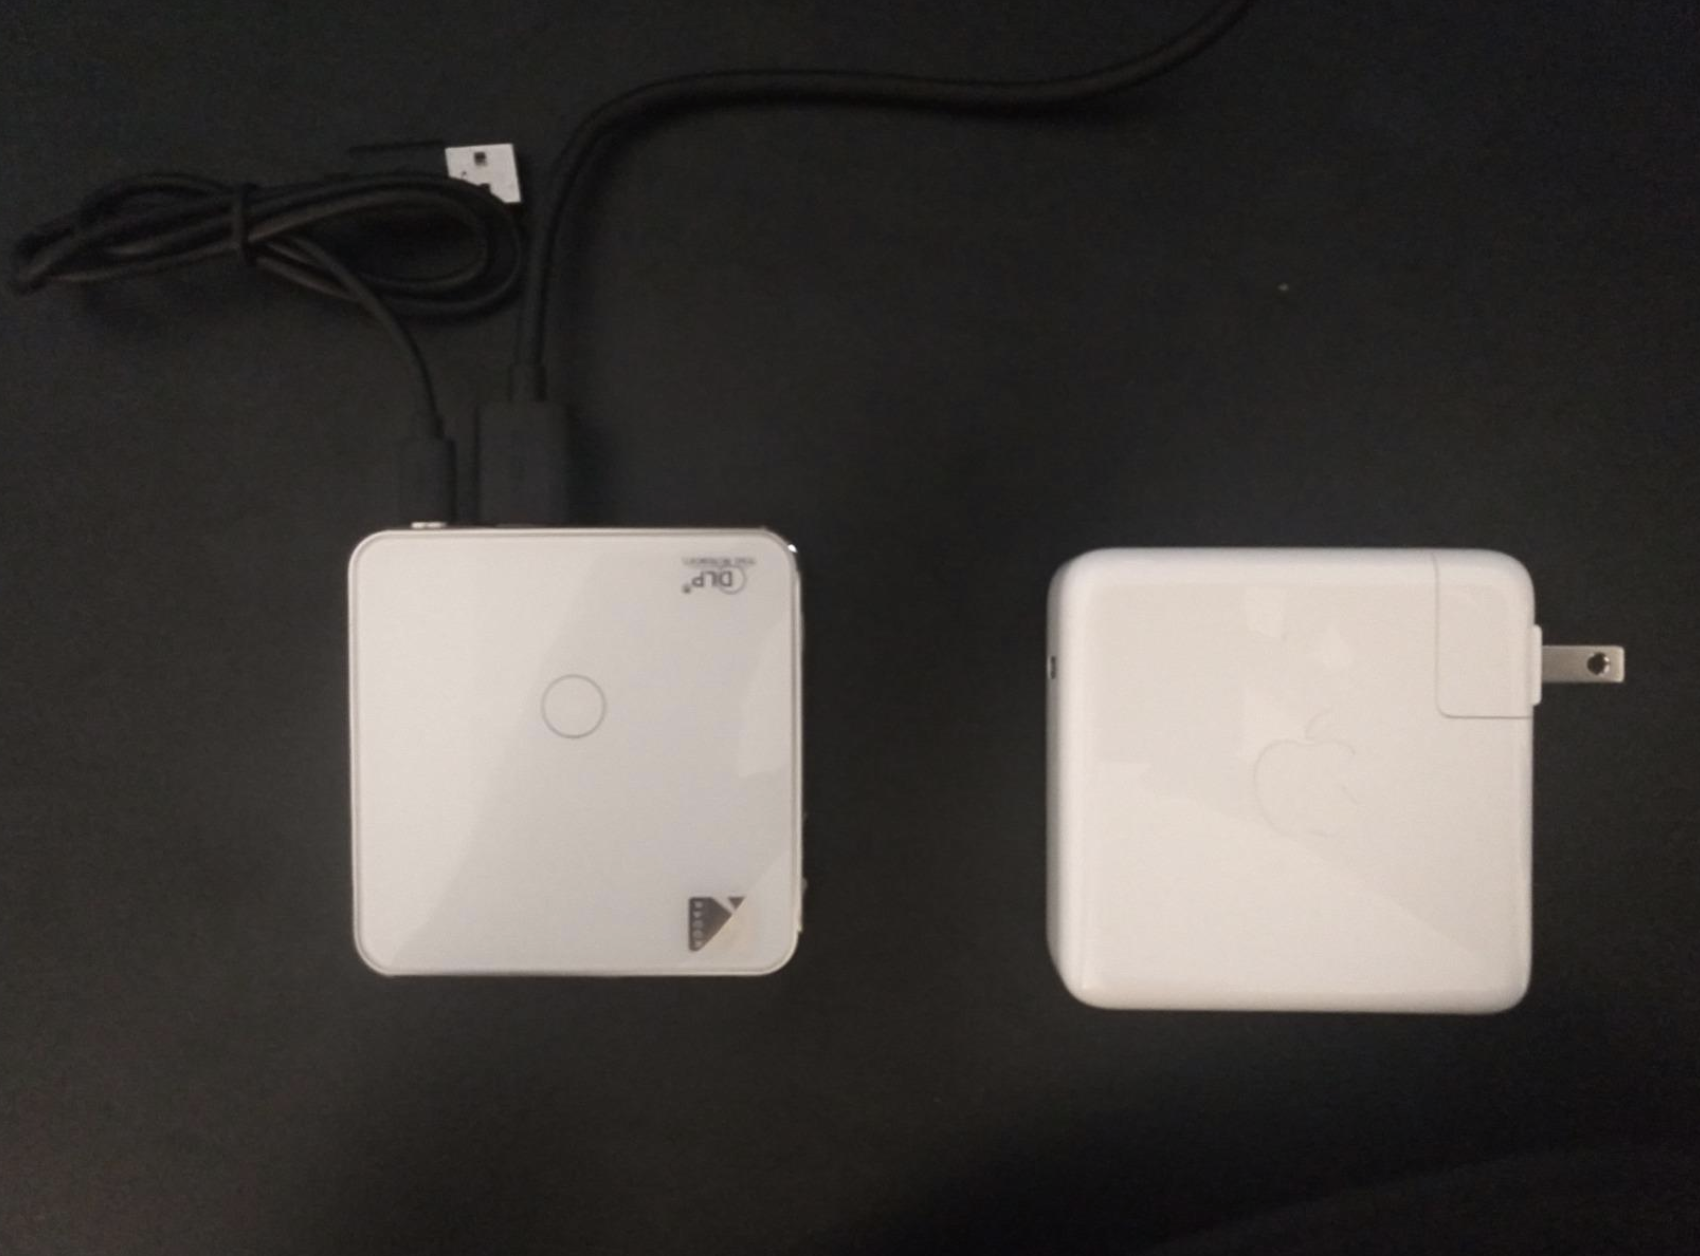 the pocket projector looks like a white square, no bigger than a Mac charger